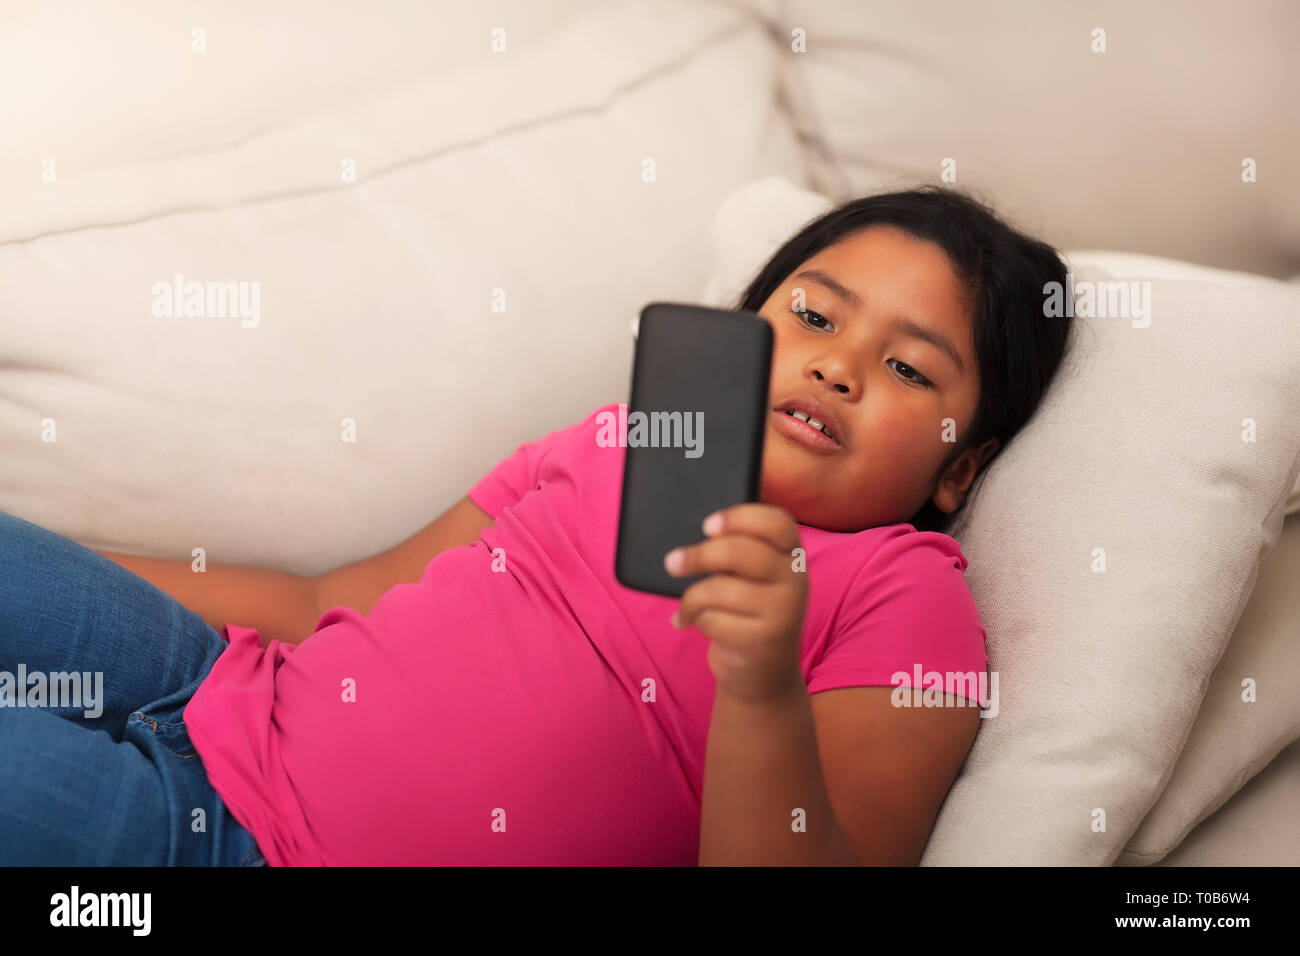 Cute latino girl laying on a comfy couch using a mobile phone to communicate with friends. Stock Photo